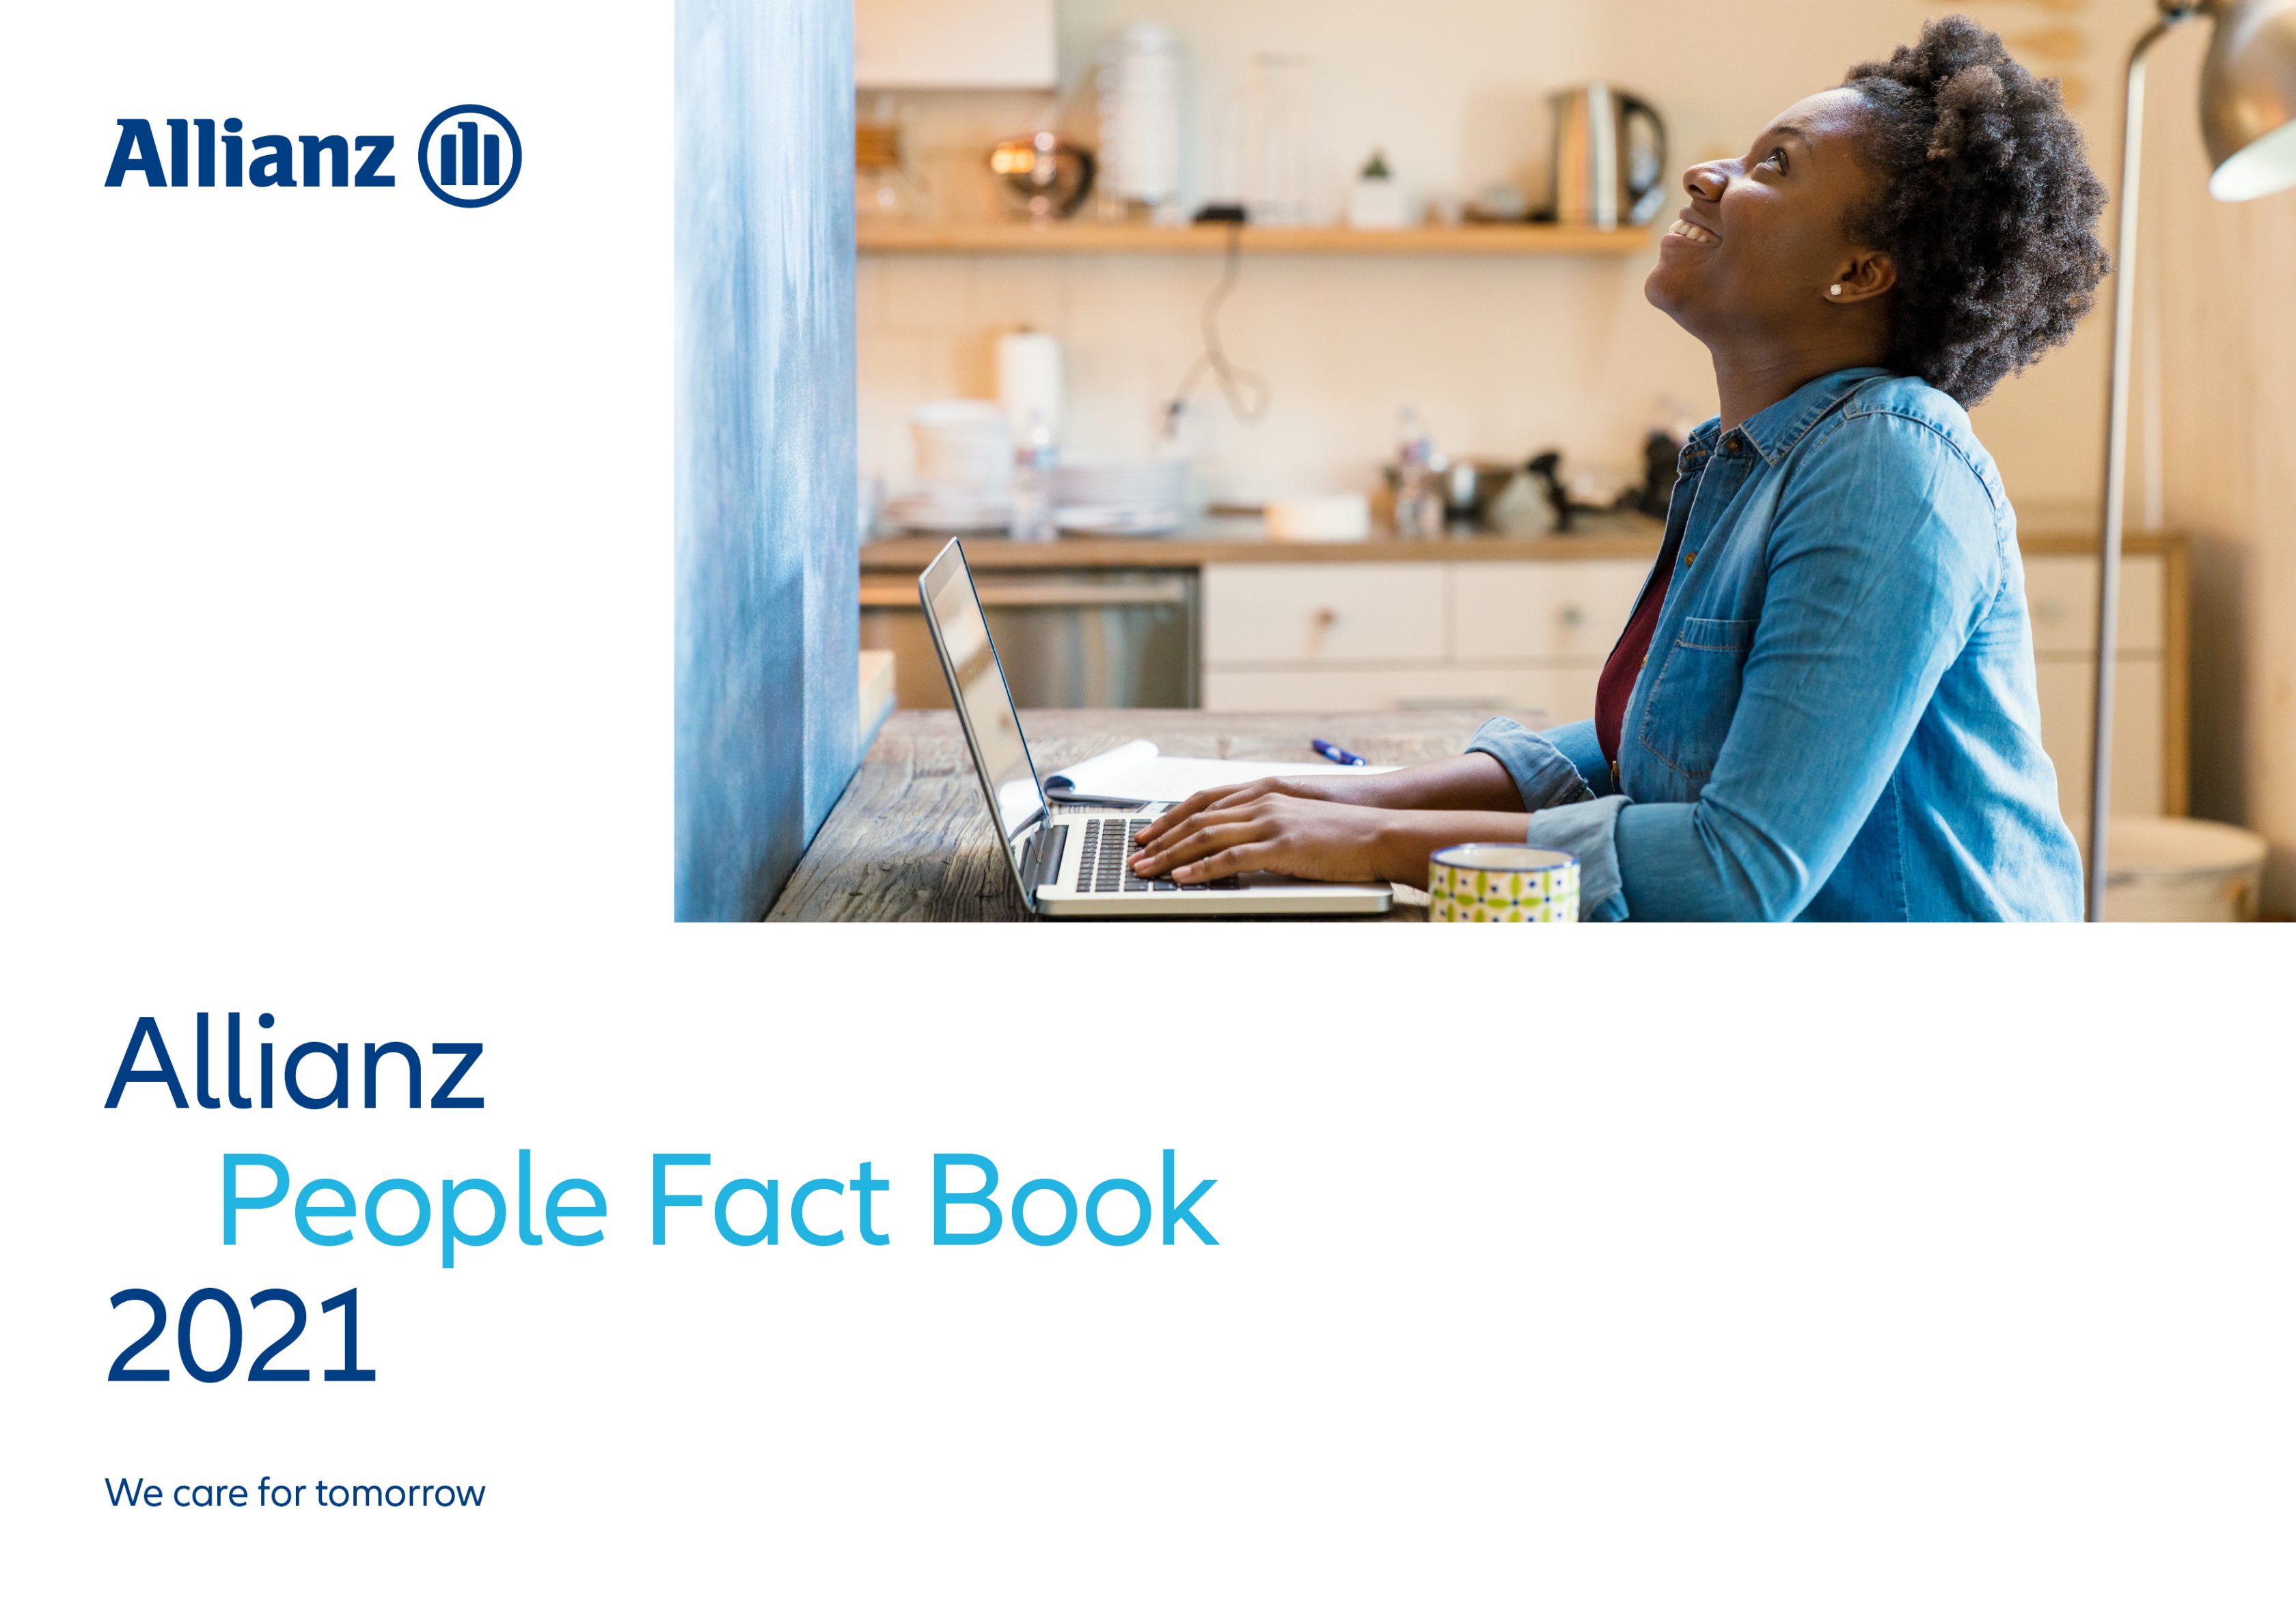 Allianz People Fact Book 2018 - Cover